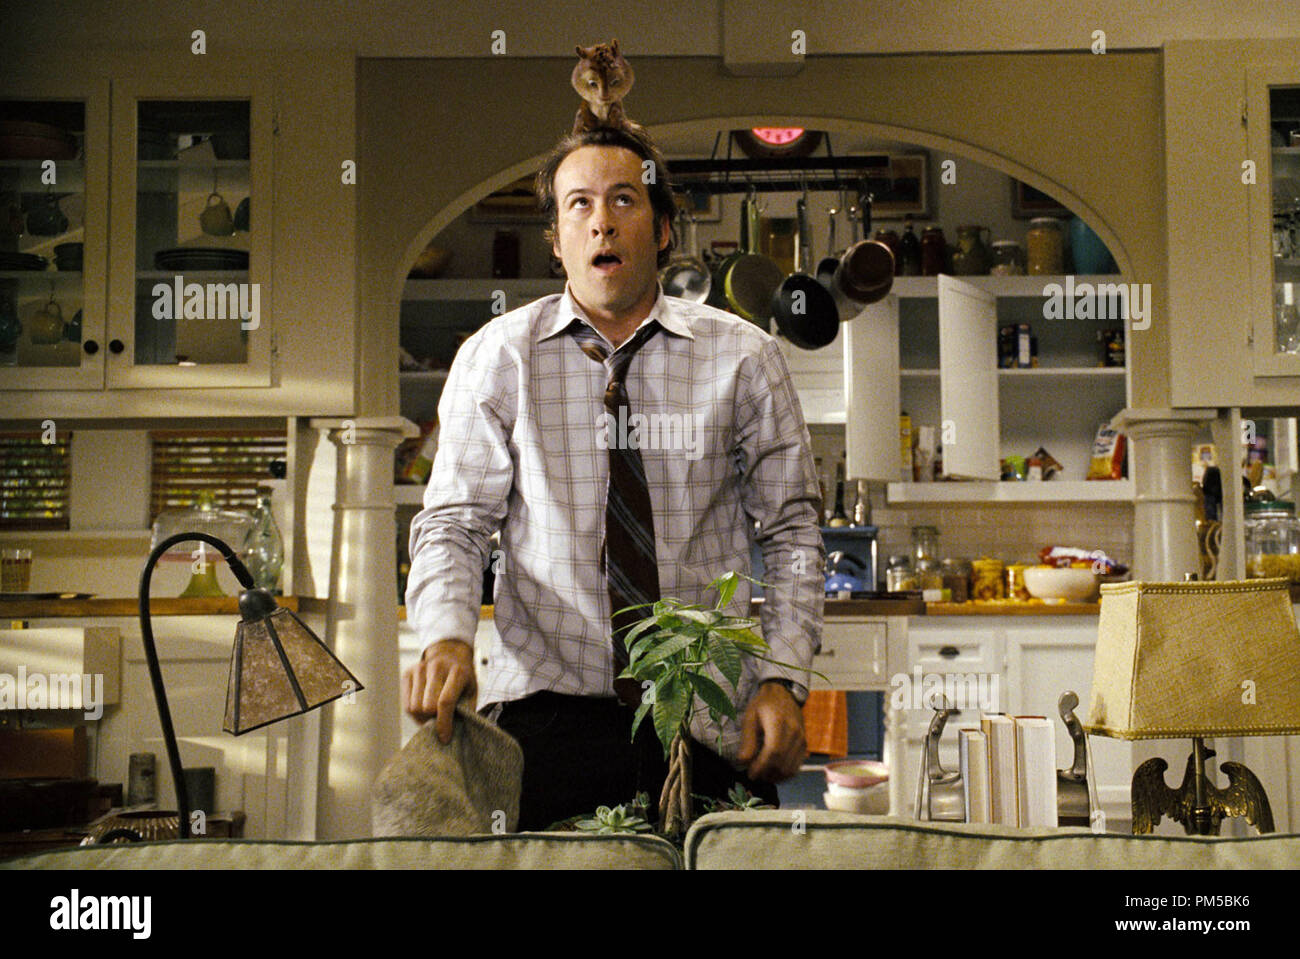 Studio Publicity Still from 'Alvin and the Chipmunks' Jason Lee © 2007 20th Century Fox Photo credit: Rhythm & Hues    File Reference # 30738688THA  For Editorial Use Only -  All Rights Reserved Stock Photo